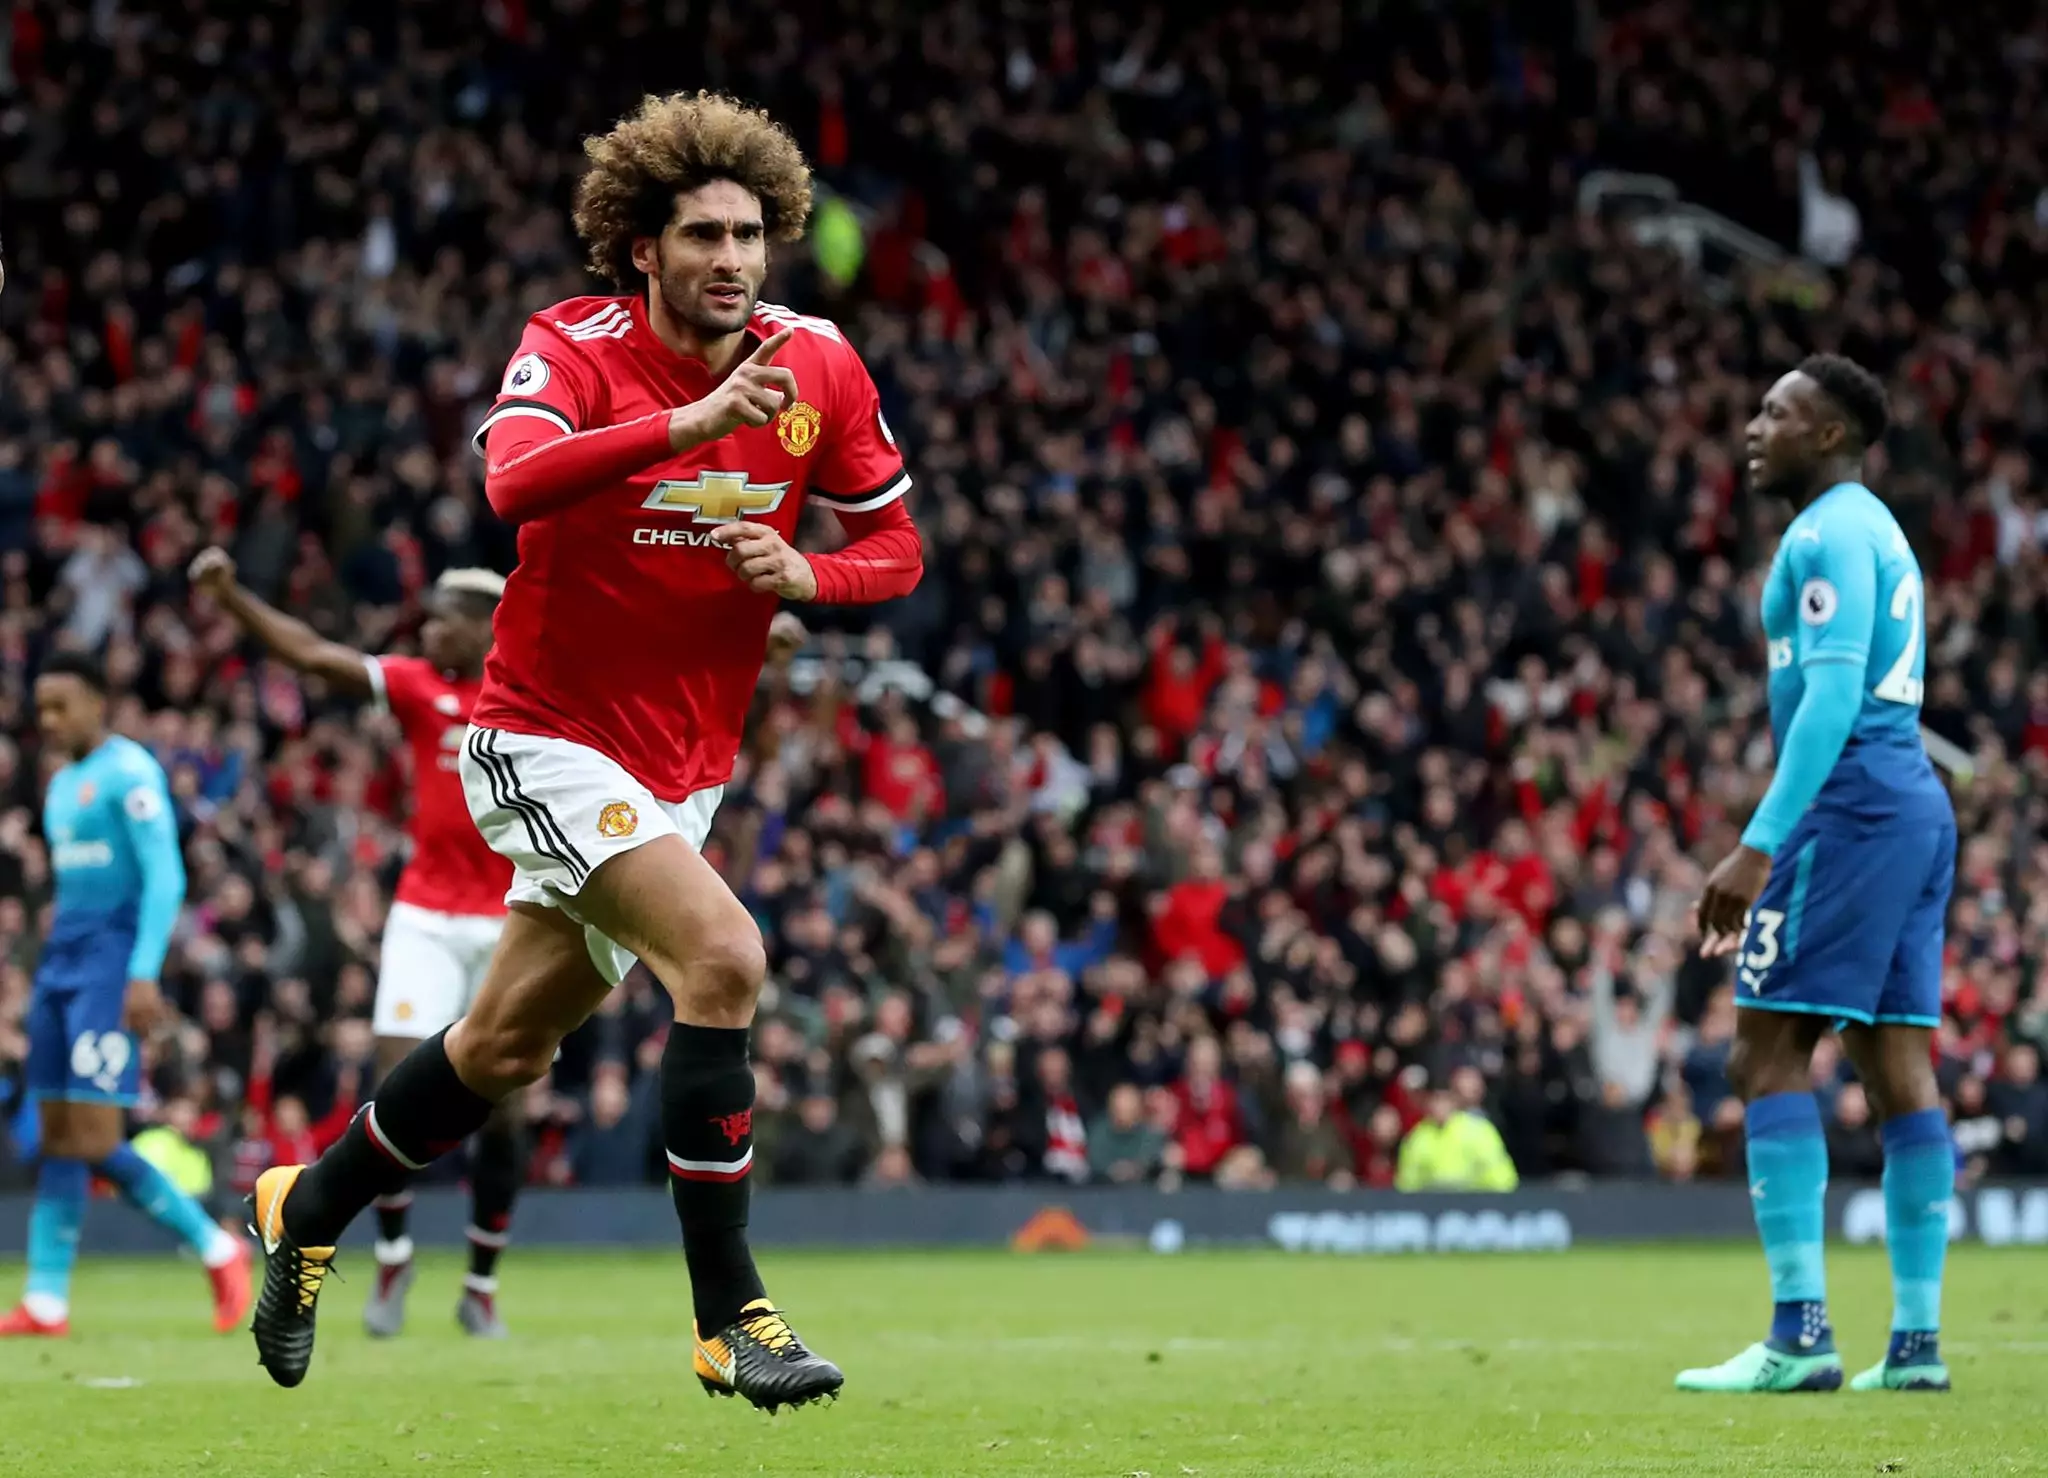 Fellaini looks certain to leave Old Trafford this summer. Image: PA Images